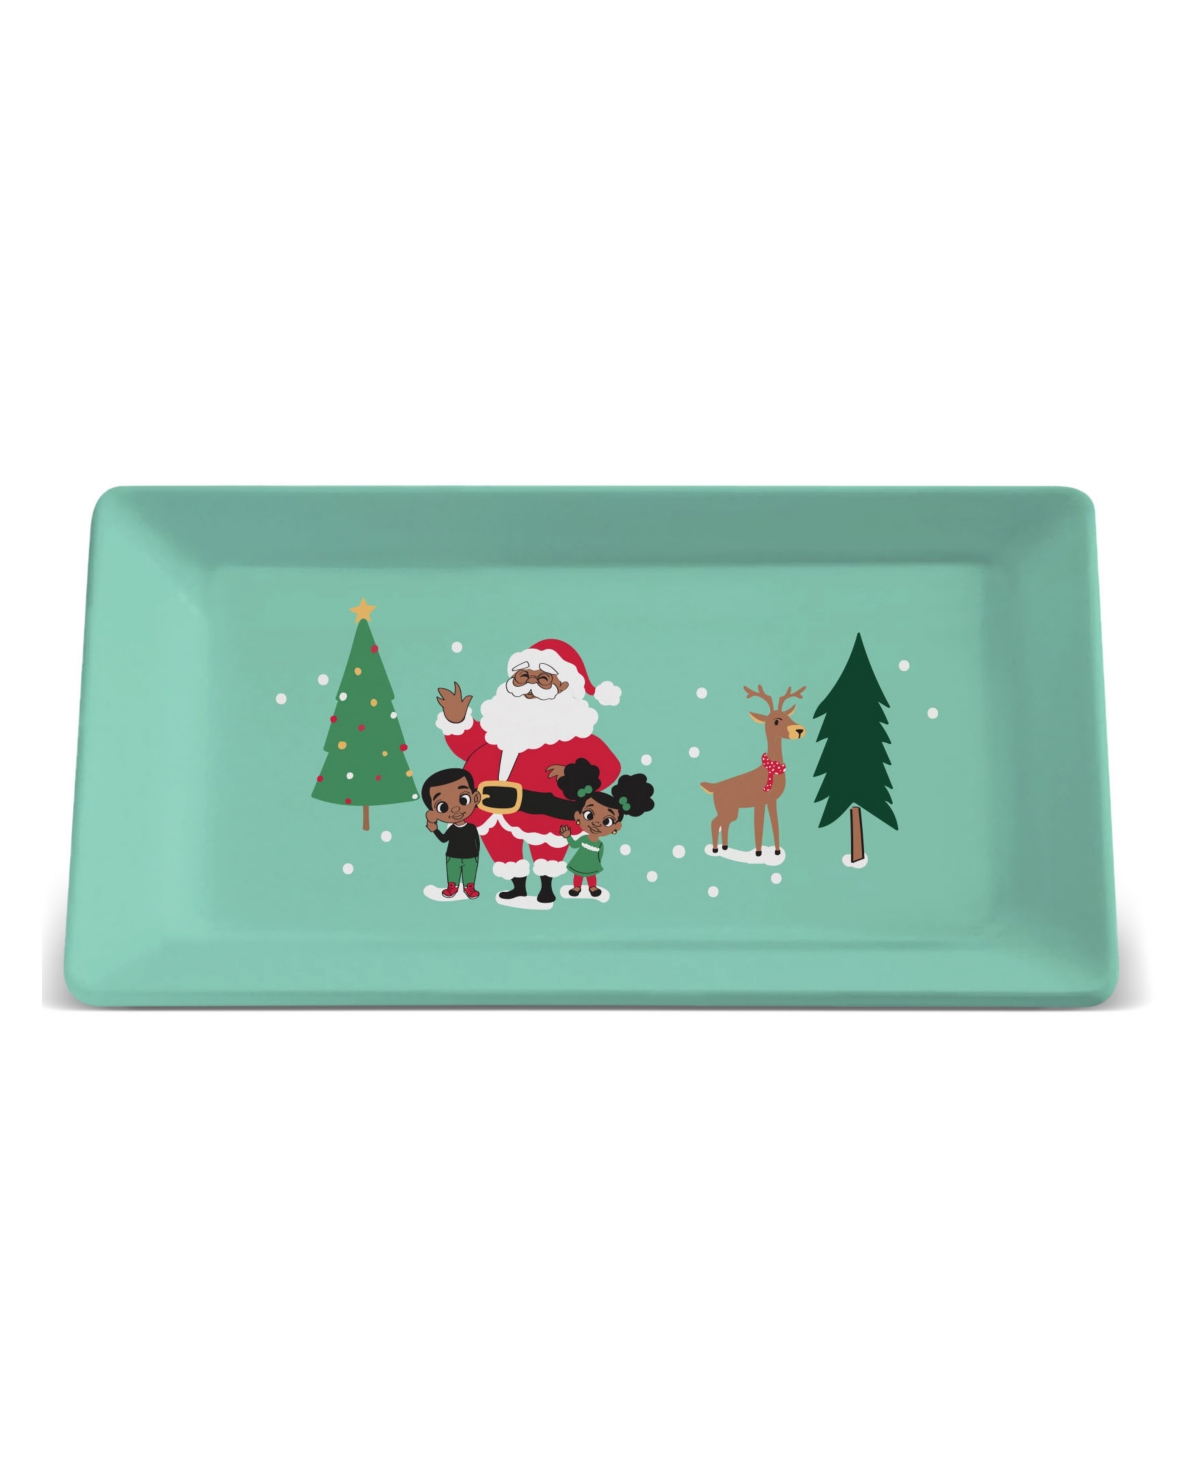 Black Paper Party Holiday Klaus Family Winter Scene Loaf Pan - Green